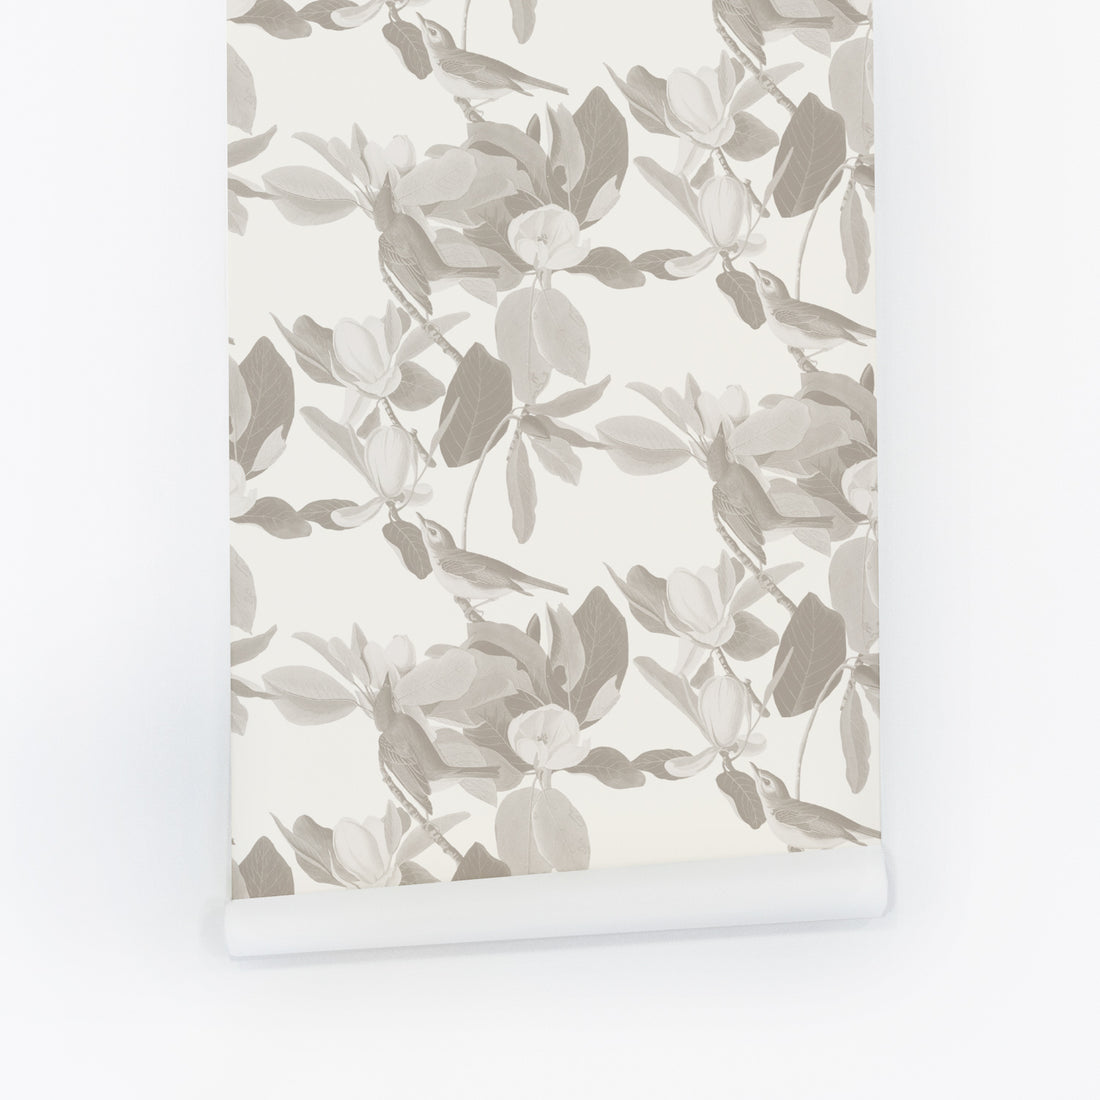 Vintage birds and botanical garden wallpaper in neutral taupe color